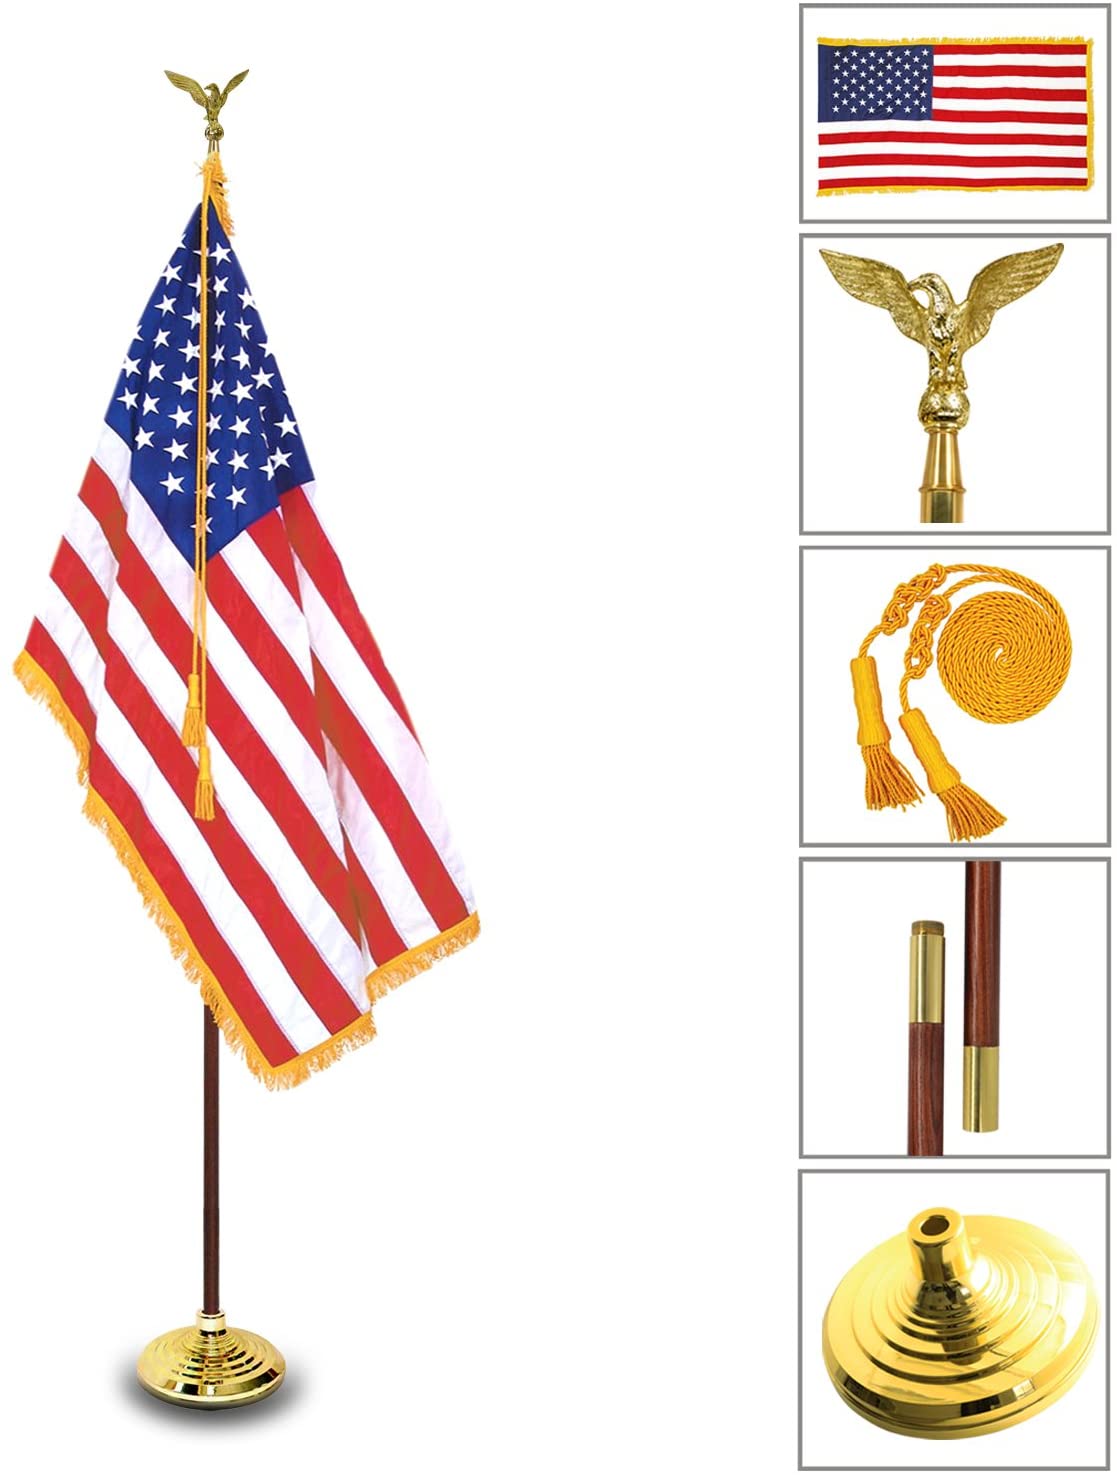 U.S.A. Flag with Pole ,Stand, Gold Tassel, Gold Eagle